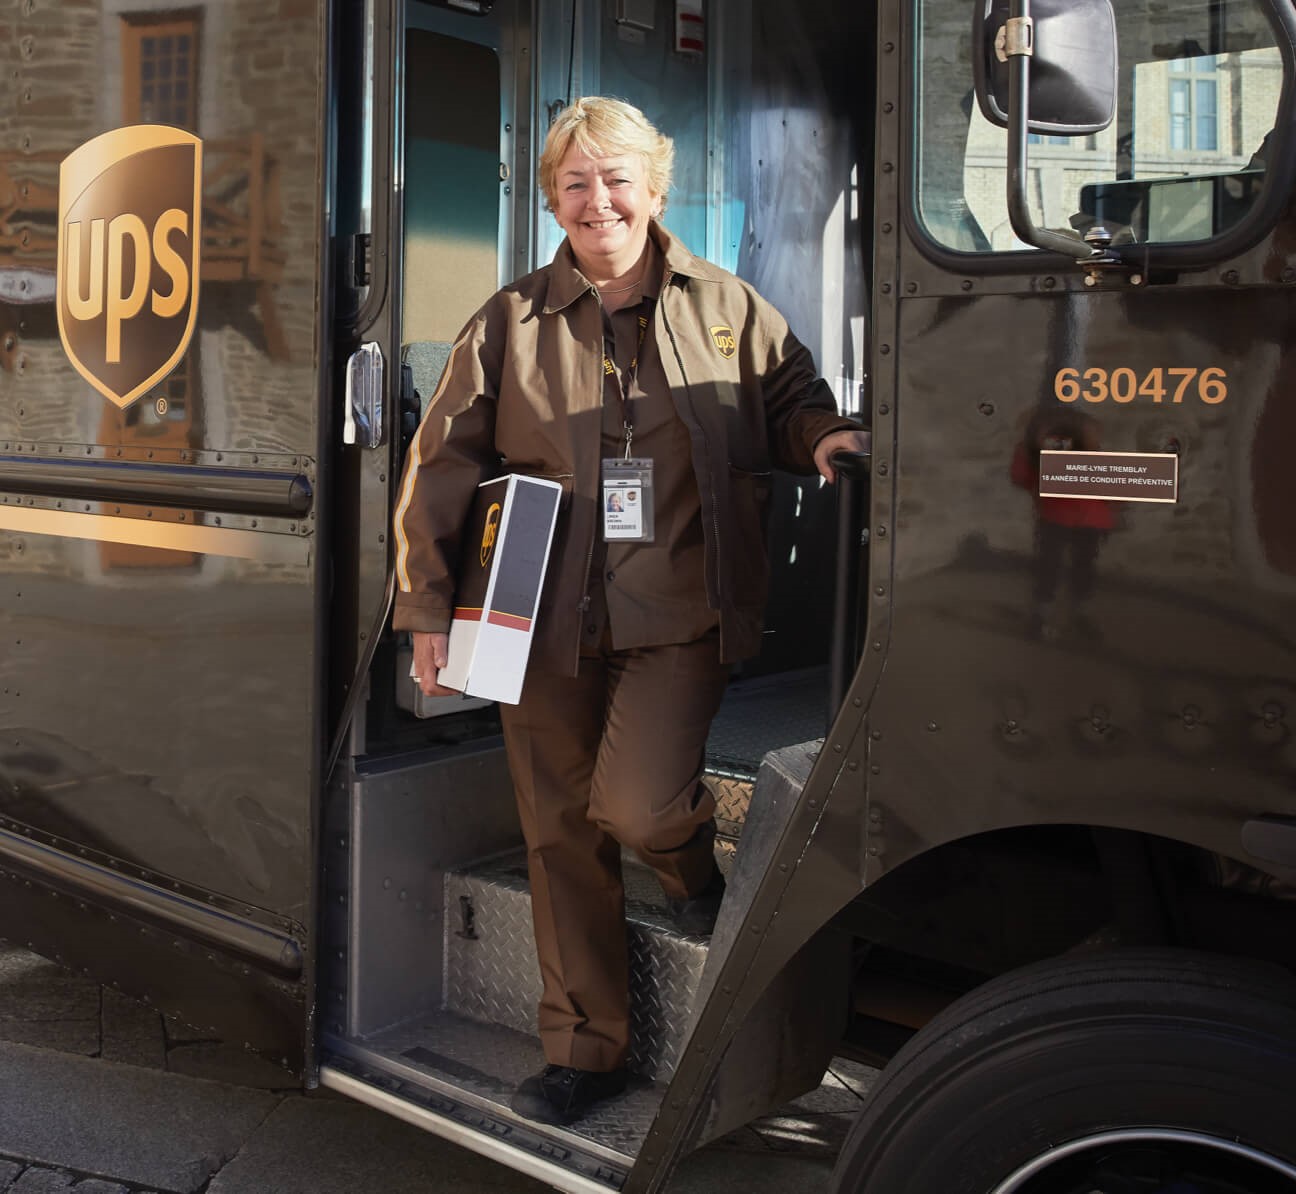 Cargo Van Business Driving For UPS – How to Start